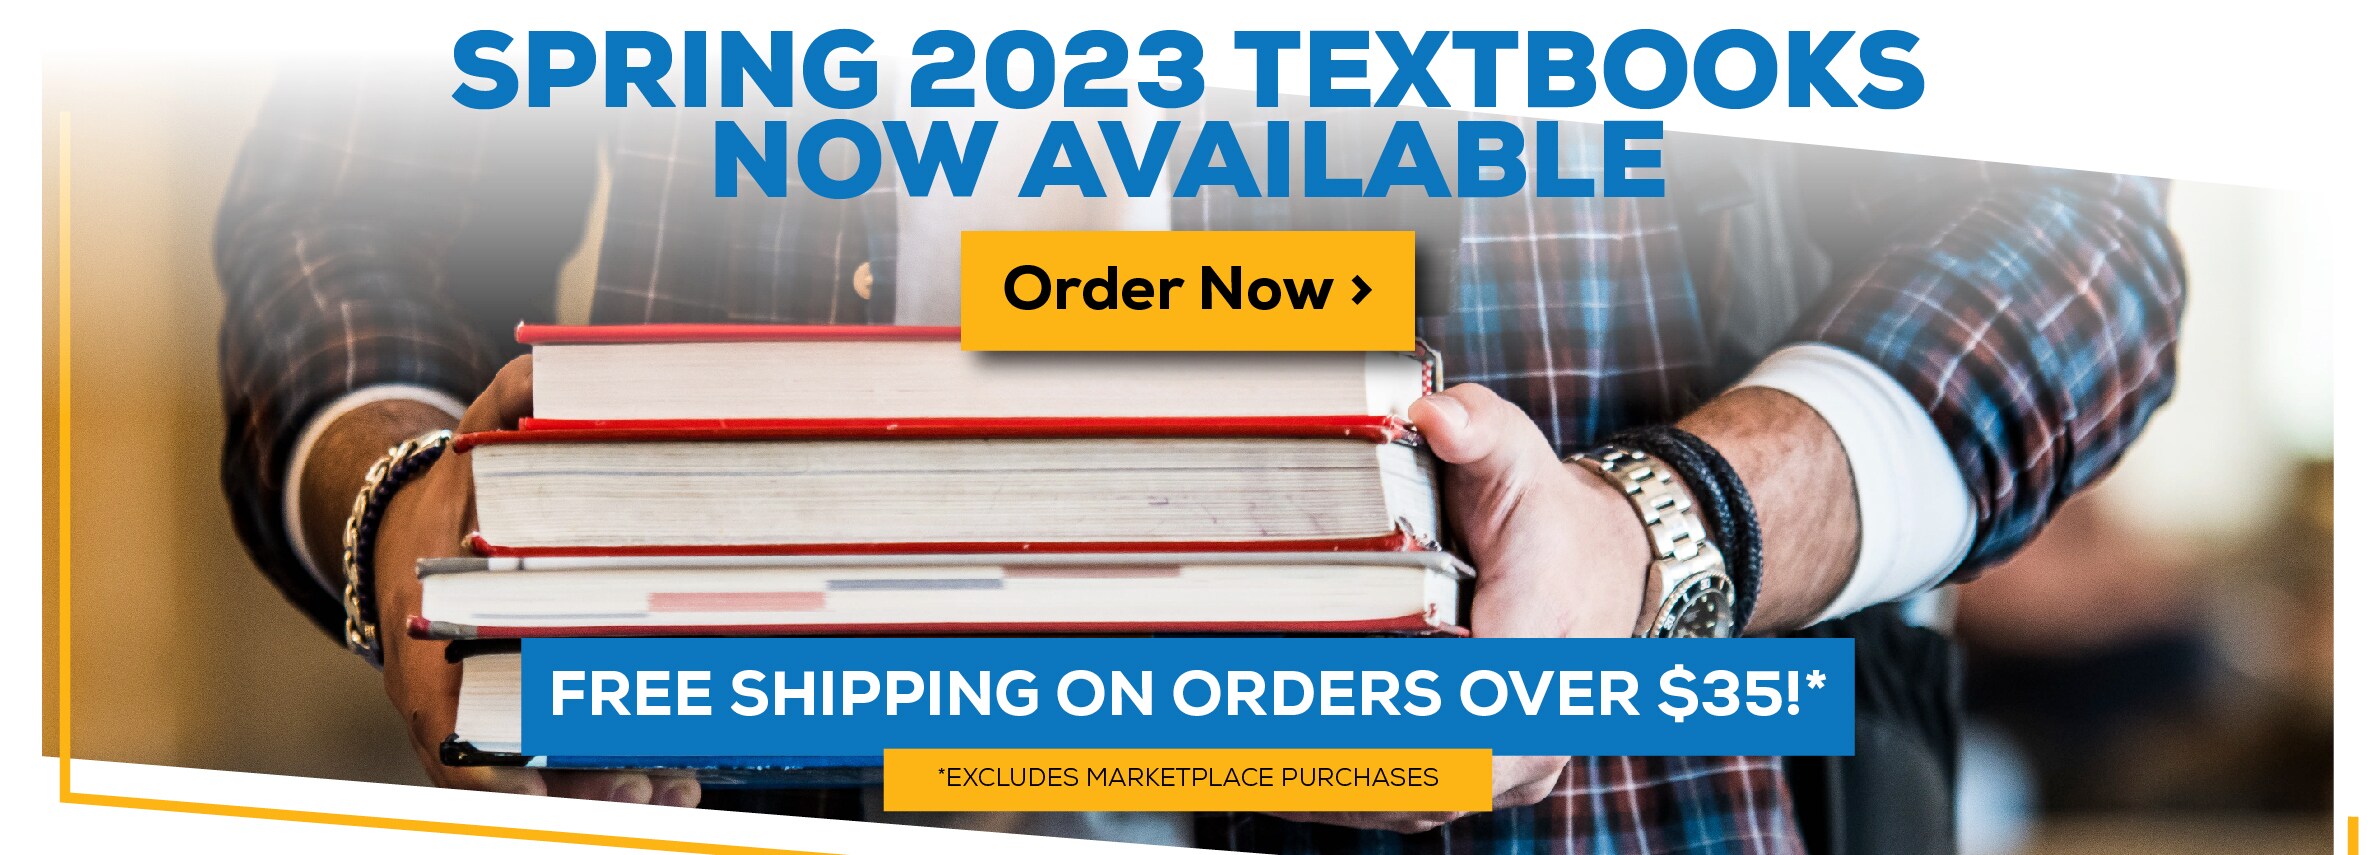 Spring 2023 Textbooks Now Available. Free shipping on orders over $35! Excludes marketplace purchases. Order Now.